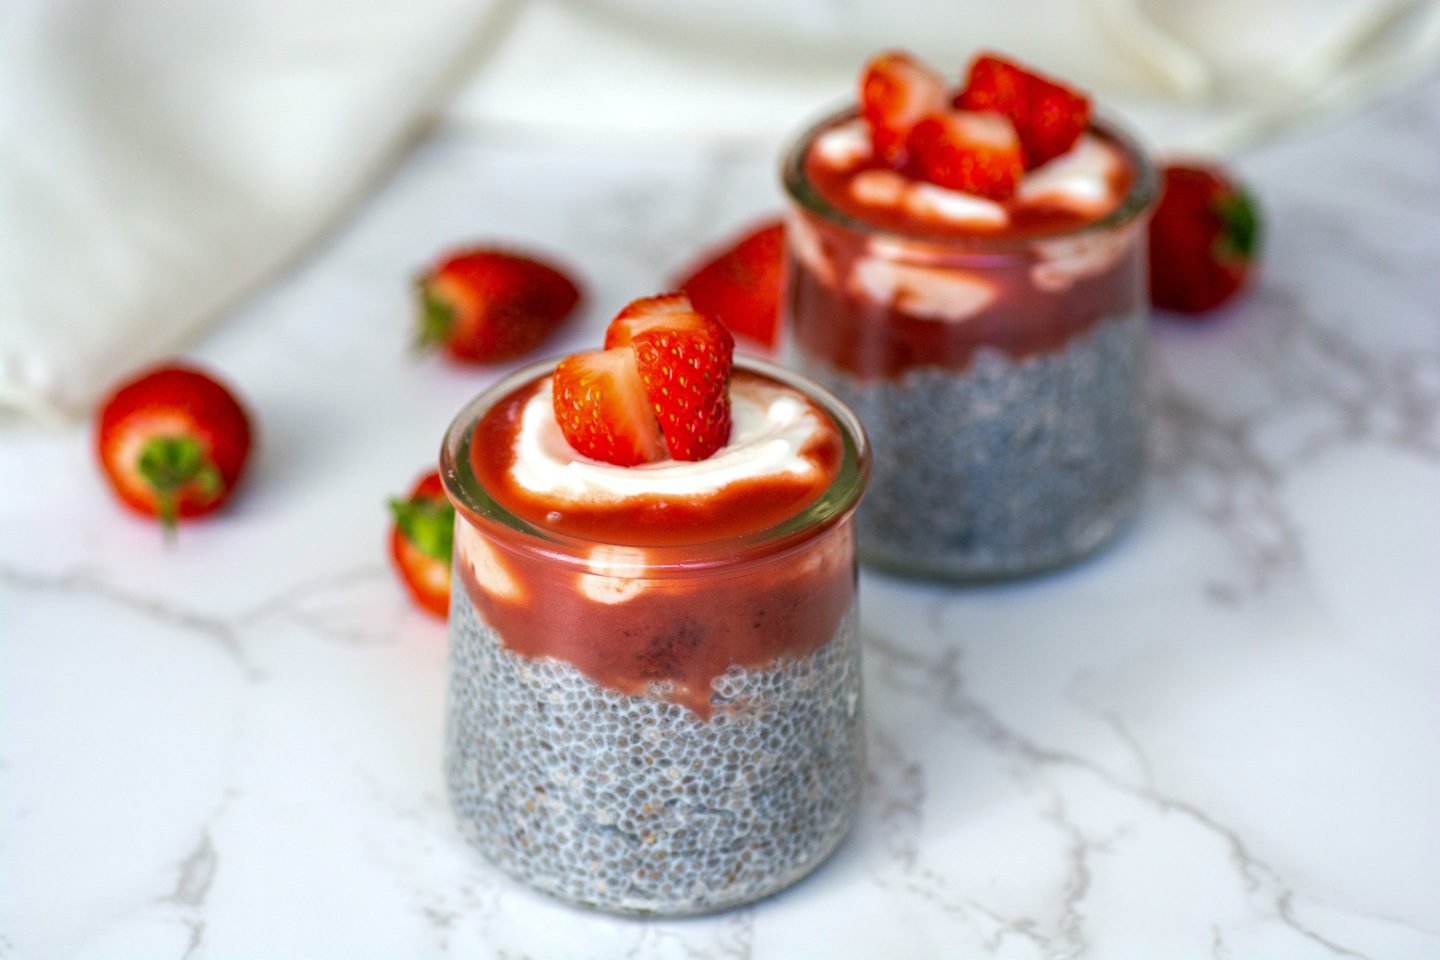 keto chia pudding topped with strawberries